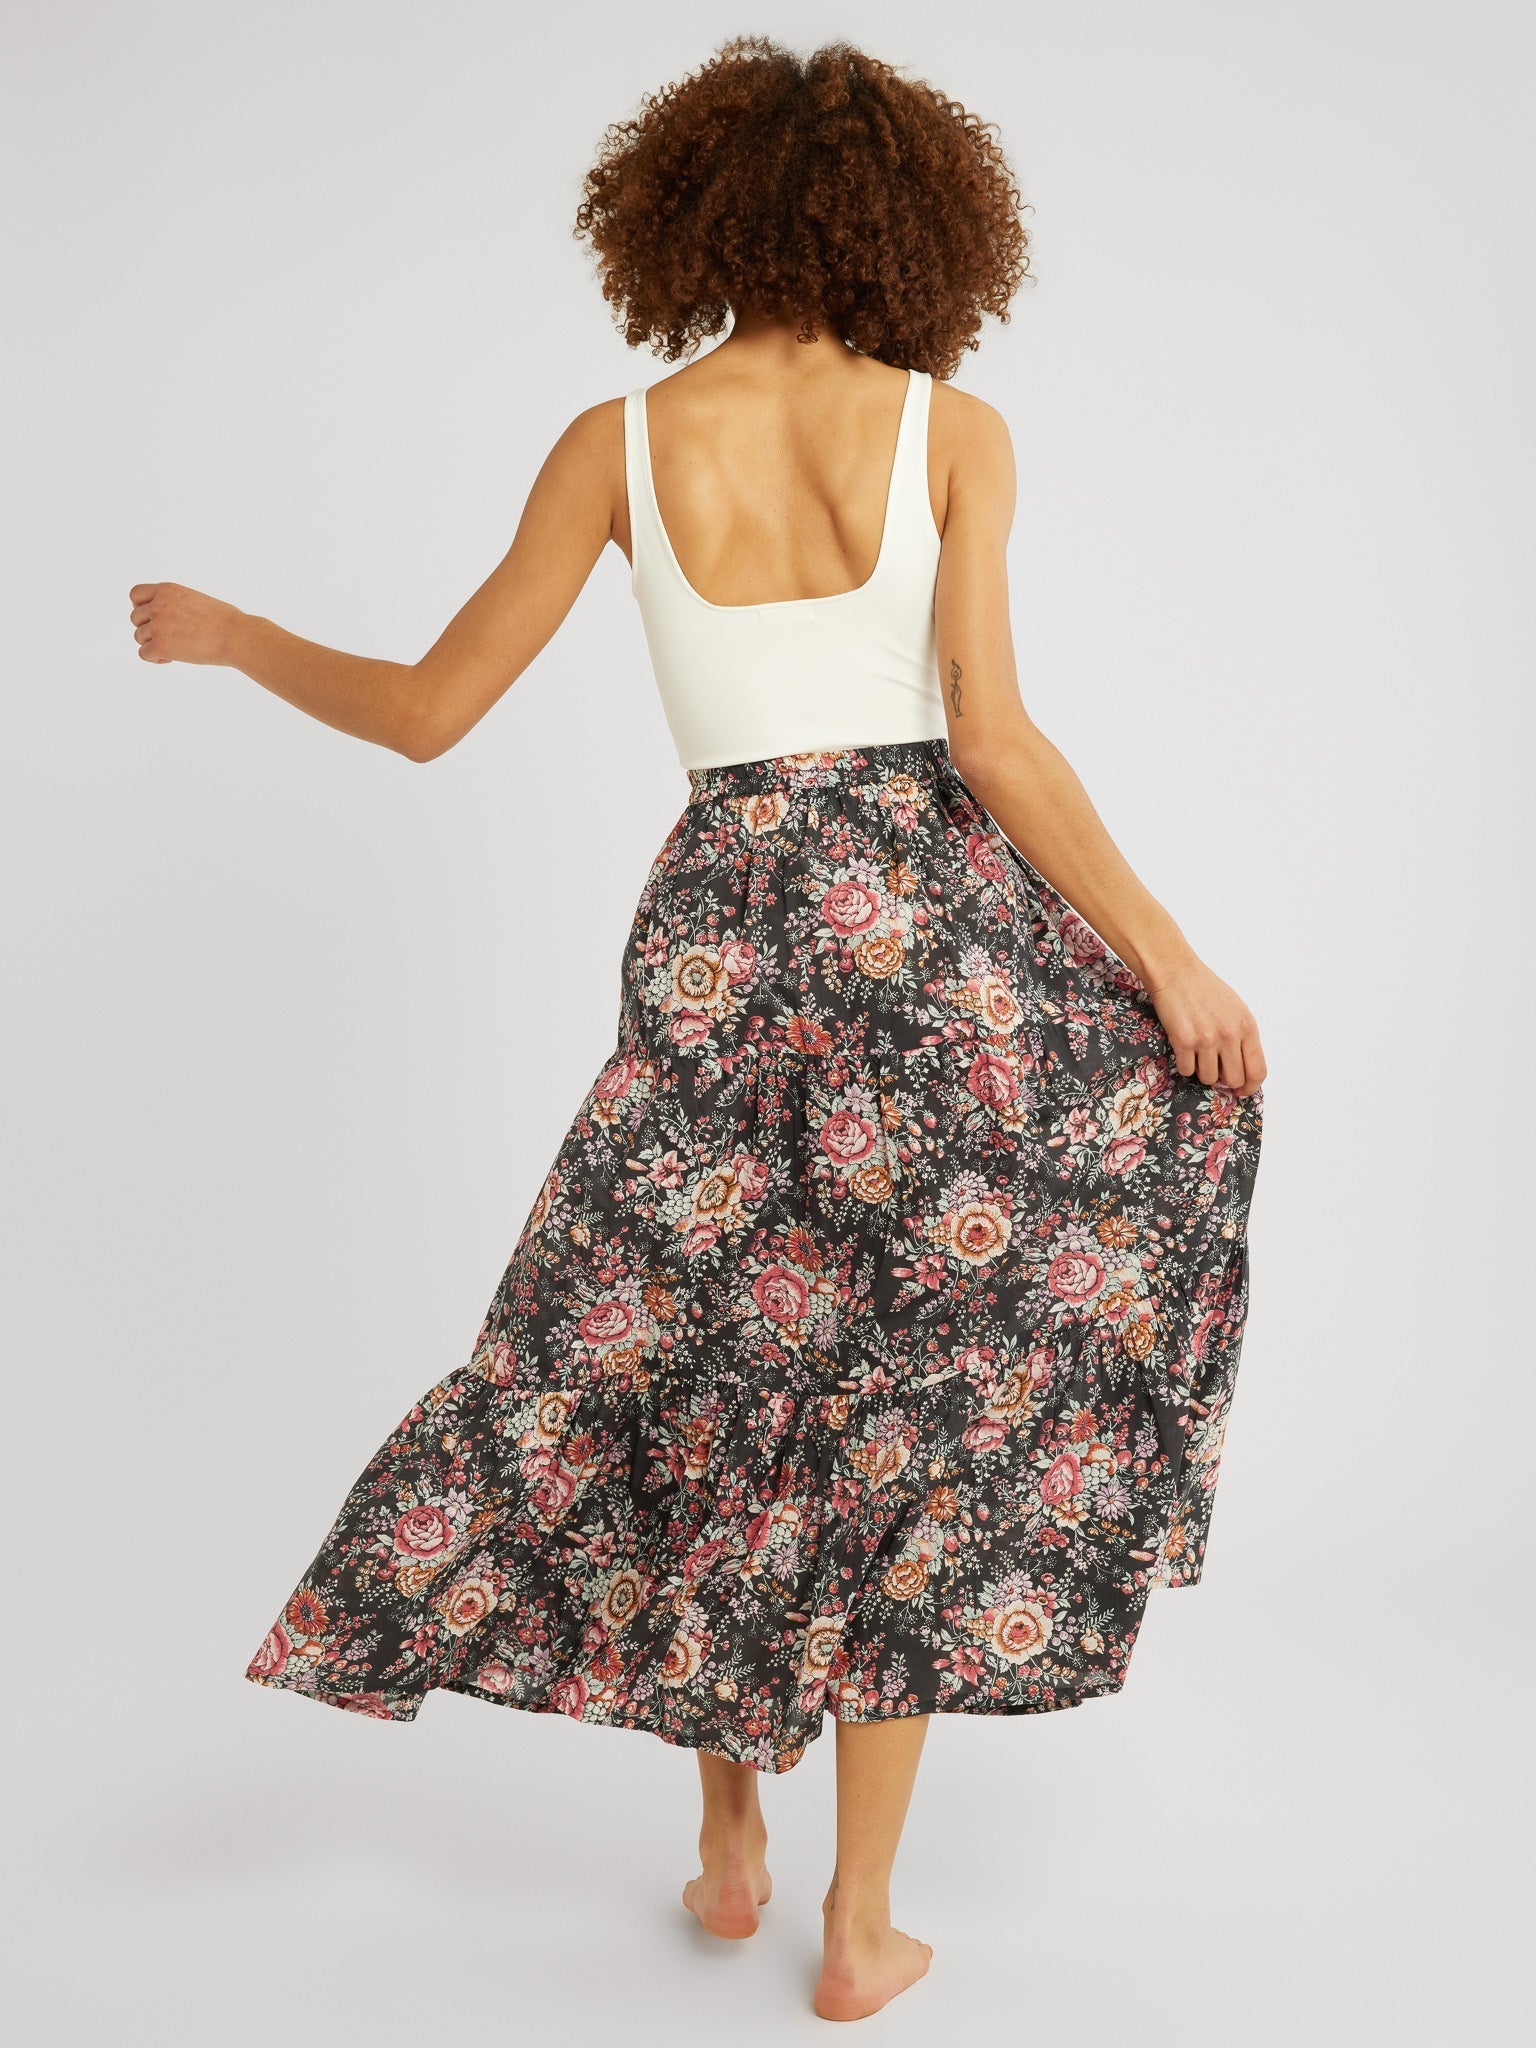 MILLE Clothing Paola Skirt in Bloomsbury